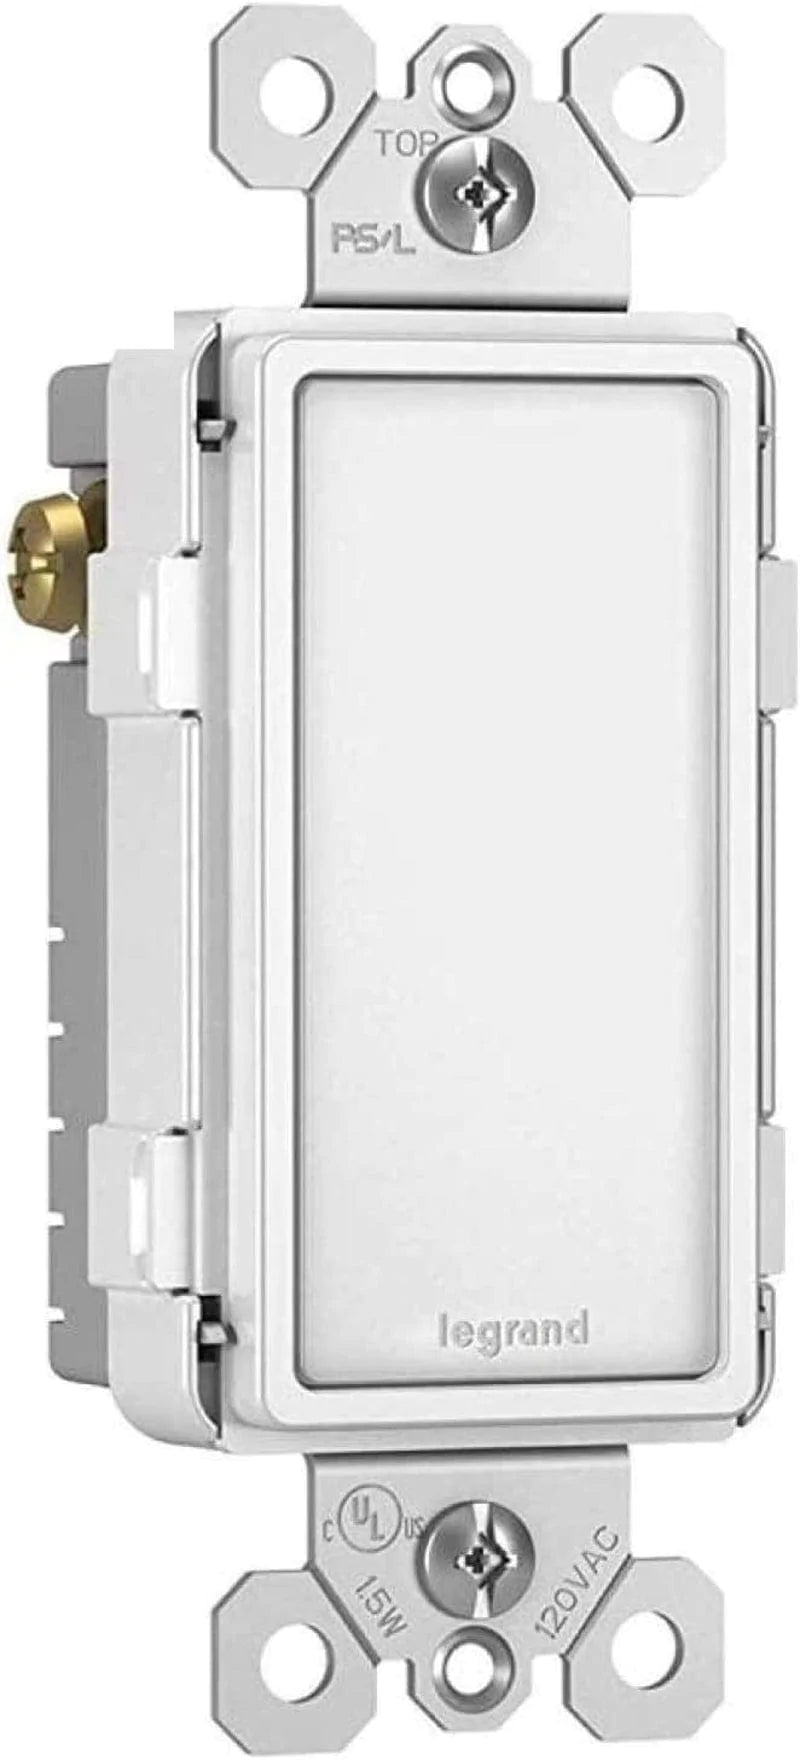 Legrand Radiant Adjustable LED Night Light Outlet, Nightlight Electrical Outlets for Bedroom and Hallway, Full, White, NTLFULLWCC6 Home & Garden > Lighting > Night Lights & Ambient Lighting Legrand-Pass & Seymour   